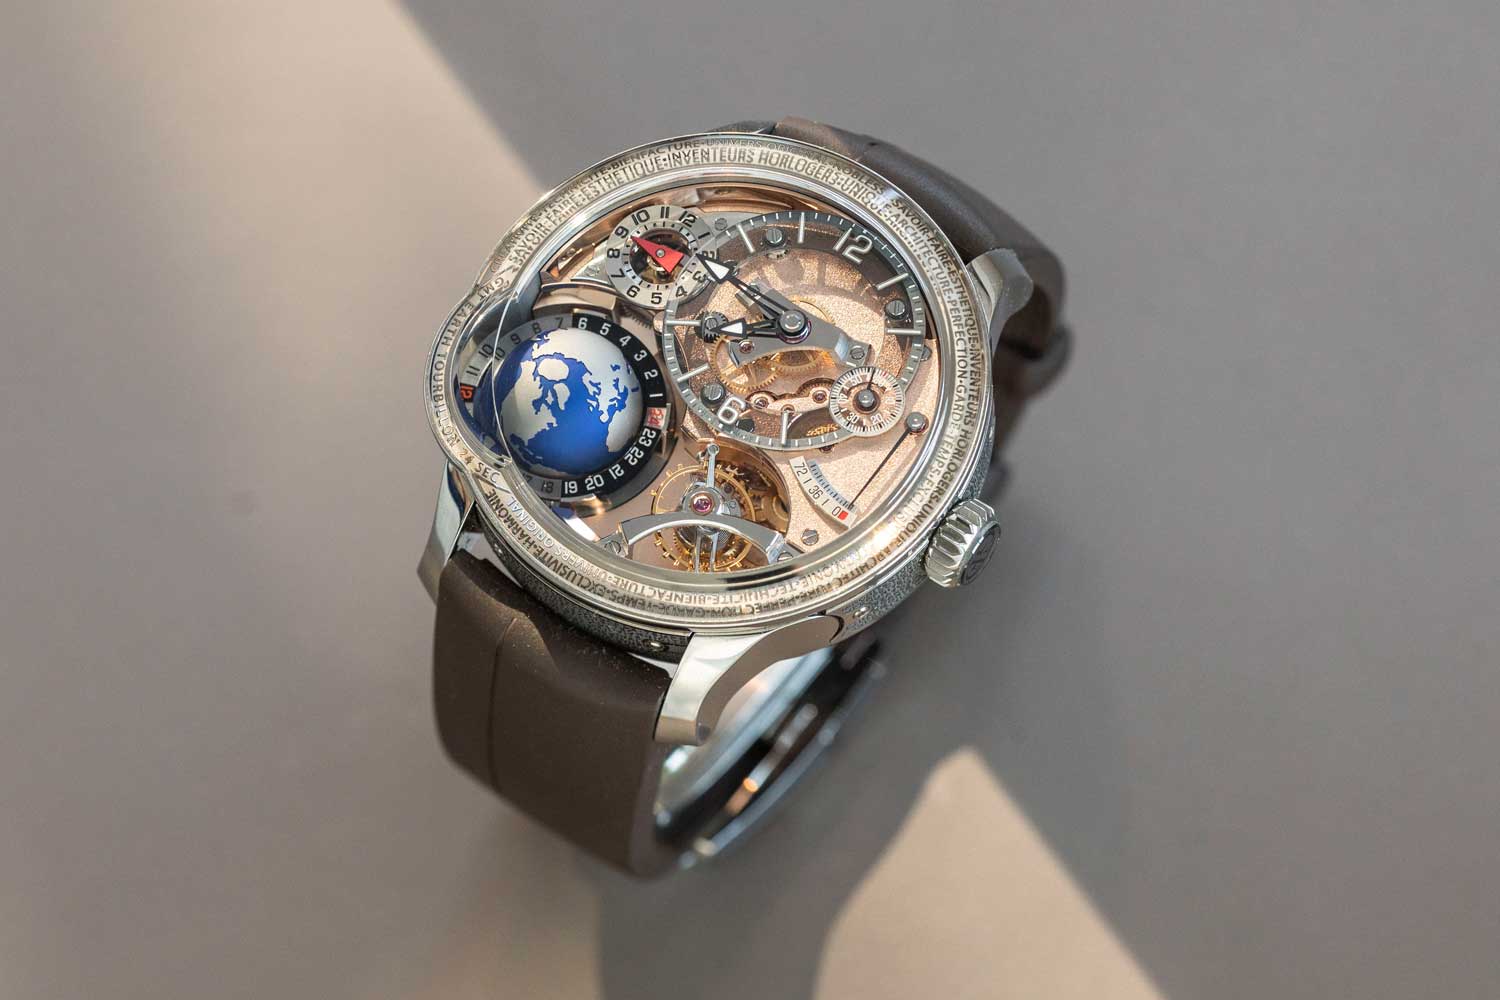 Santa Laura’s Greubel Forsey GMT Sport and GMT Earth (©Revolution)